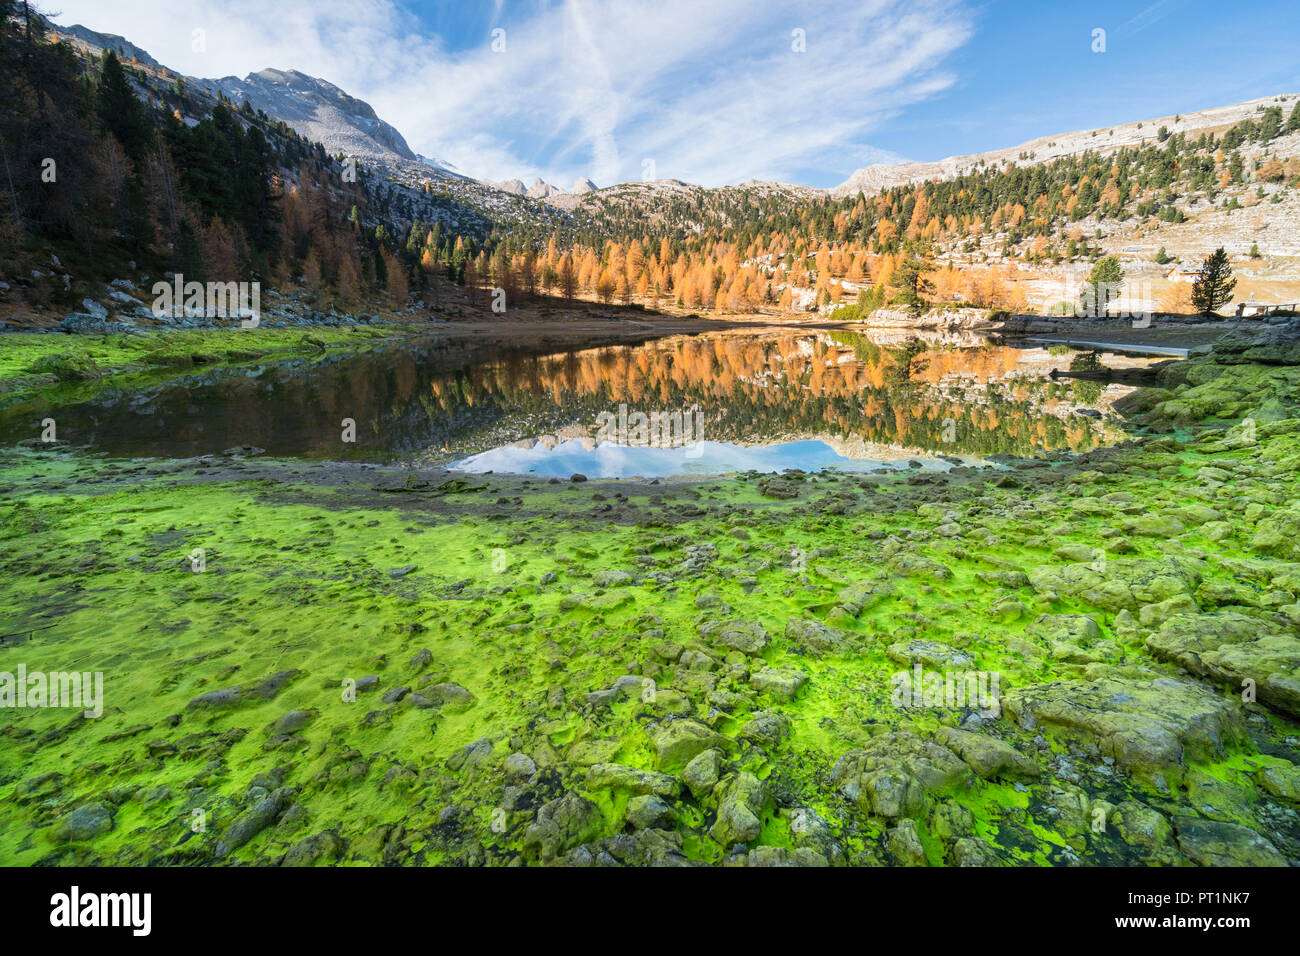 The green Fanes lake in Dolomites with autumnal coulors, Fanes valley, Badia Valley, Trentino, Italy, Stock Photo